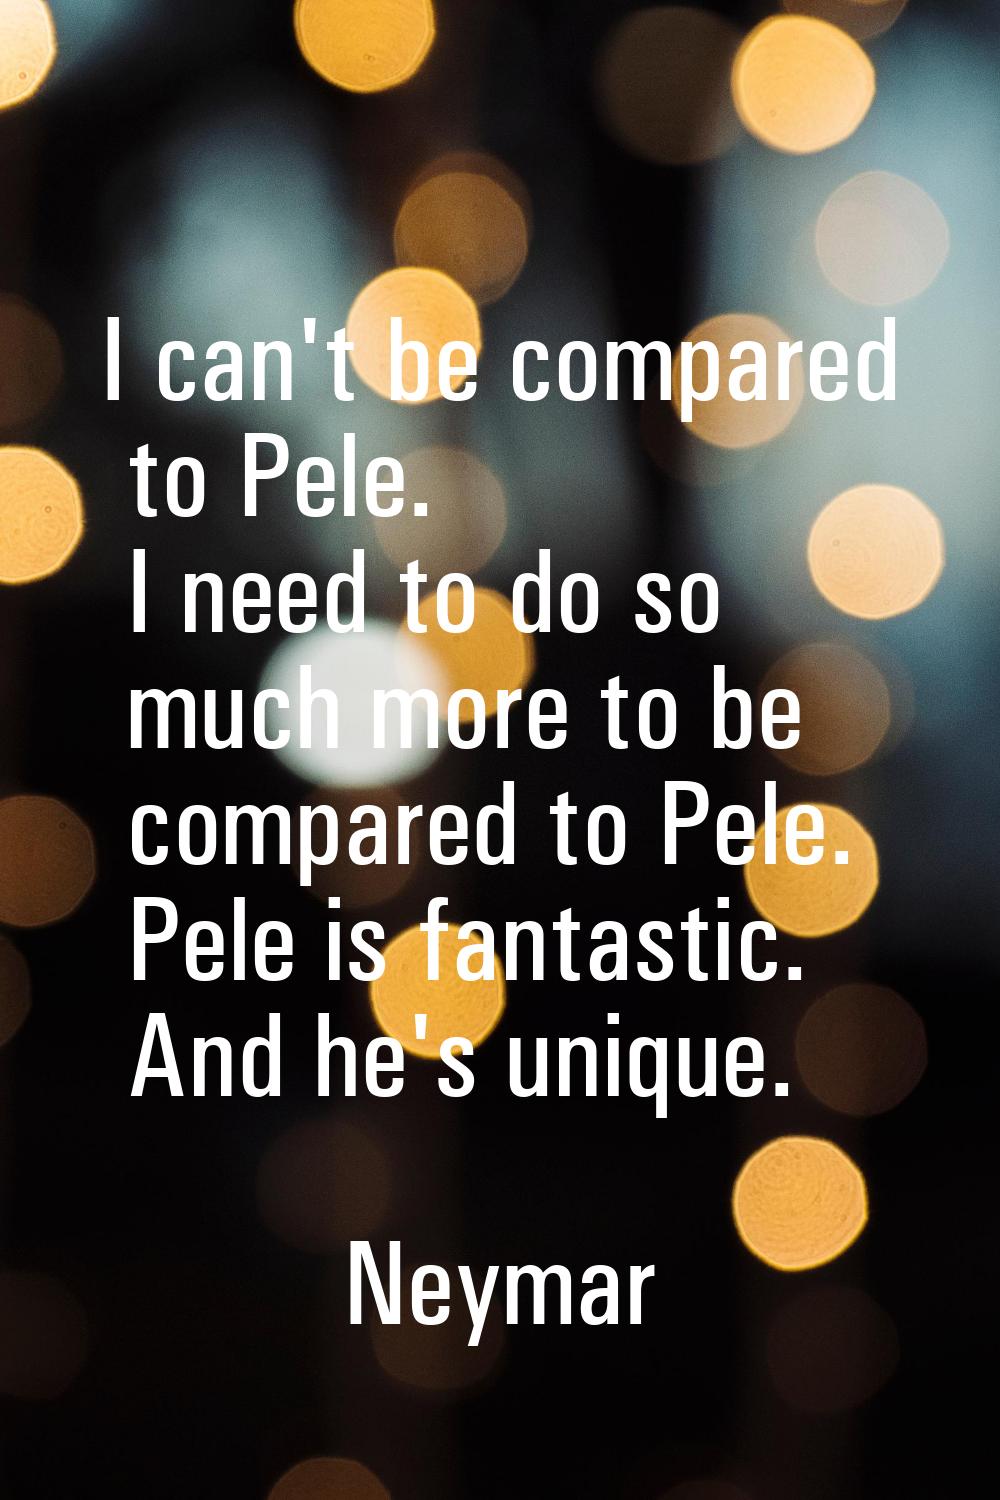 I can't be compared to Pele. I need to do so much more to be compared to Pele. Pele is fantastic. A